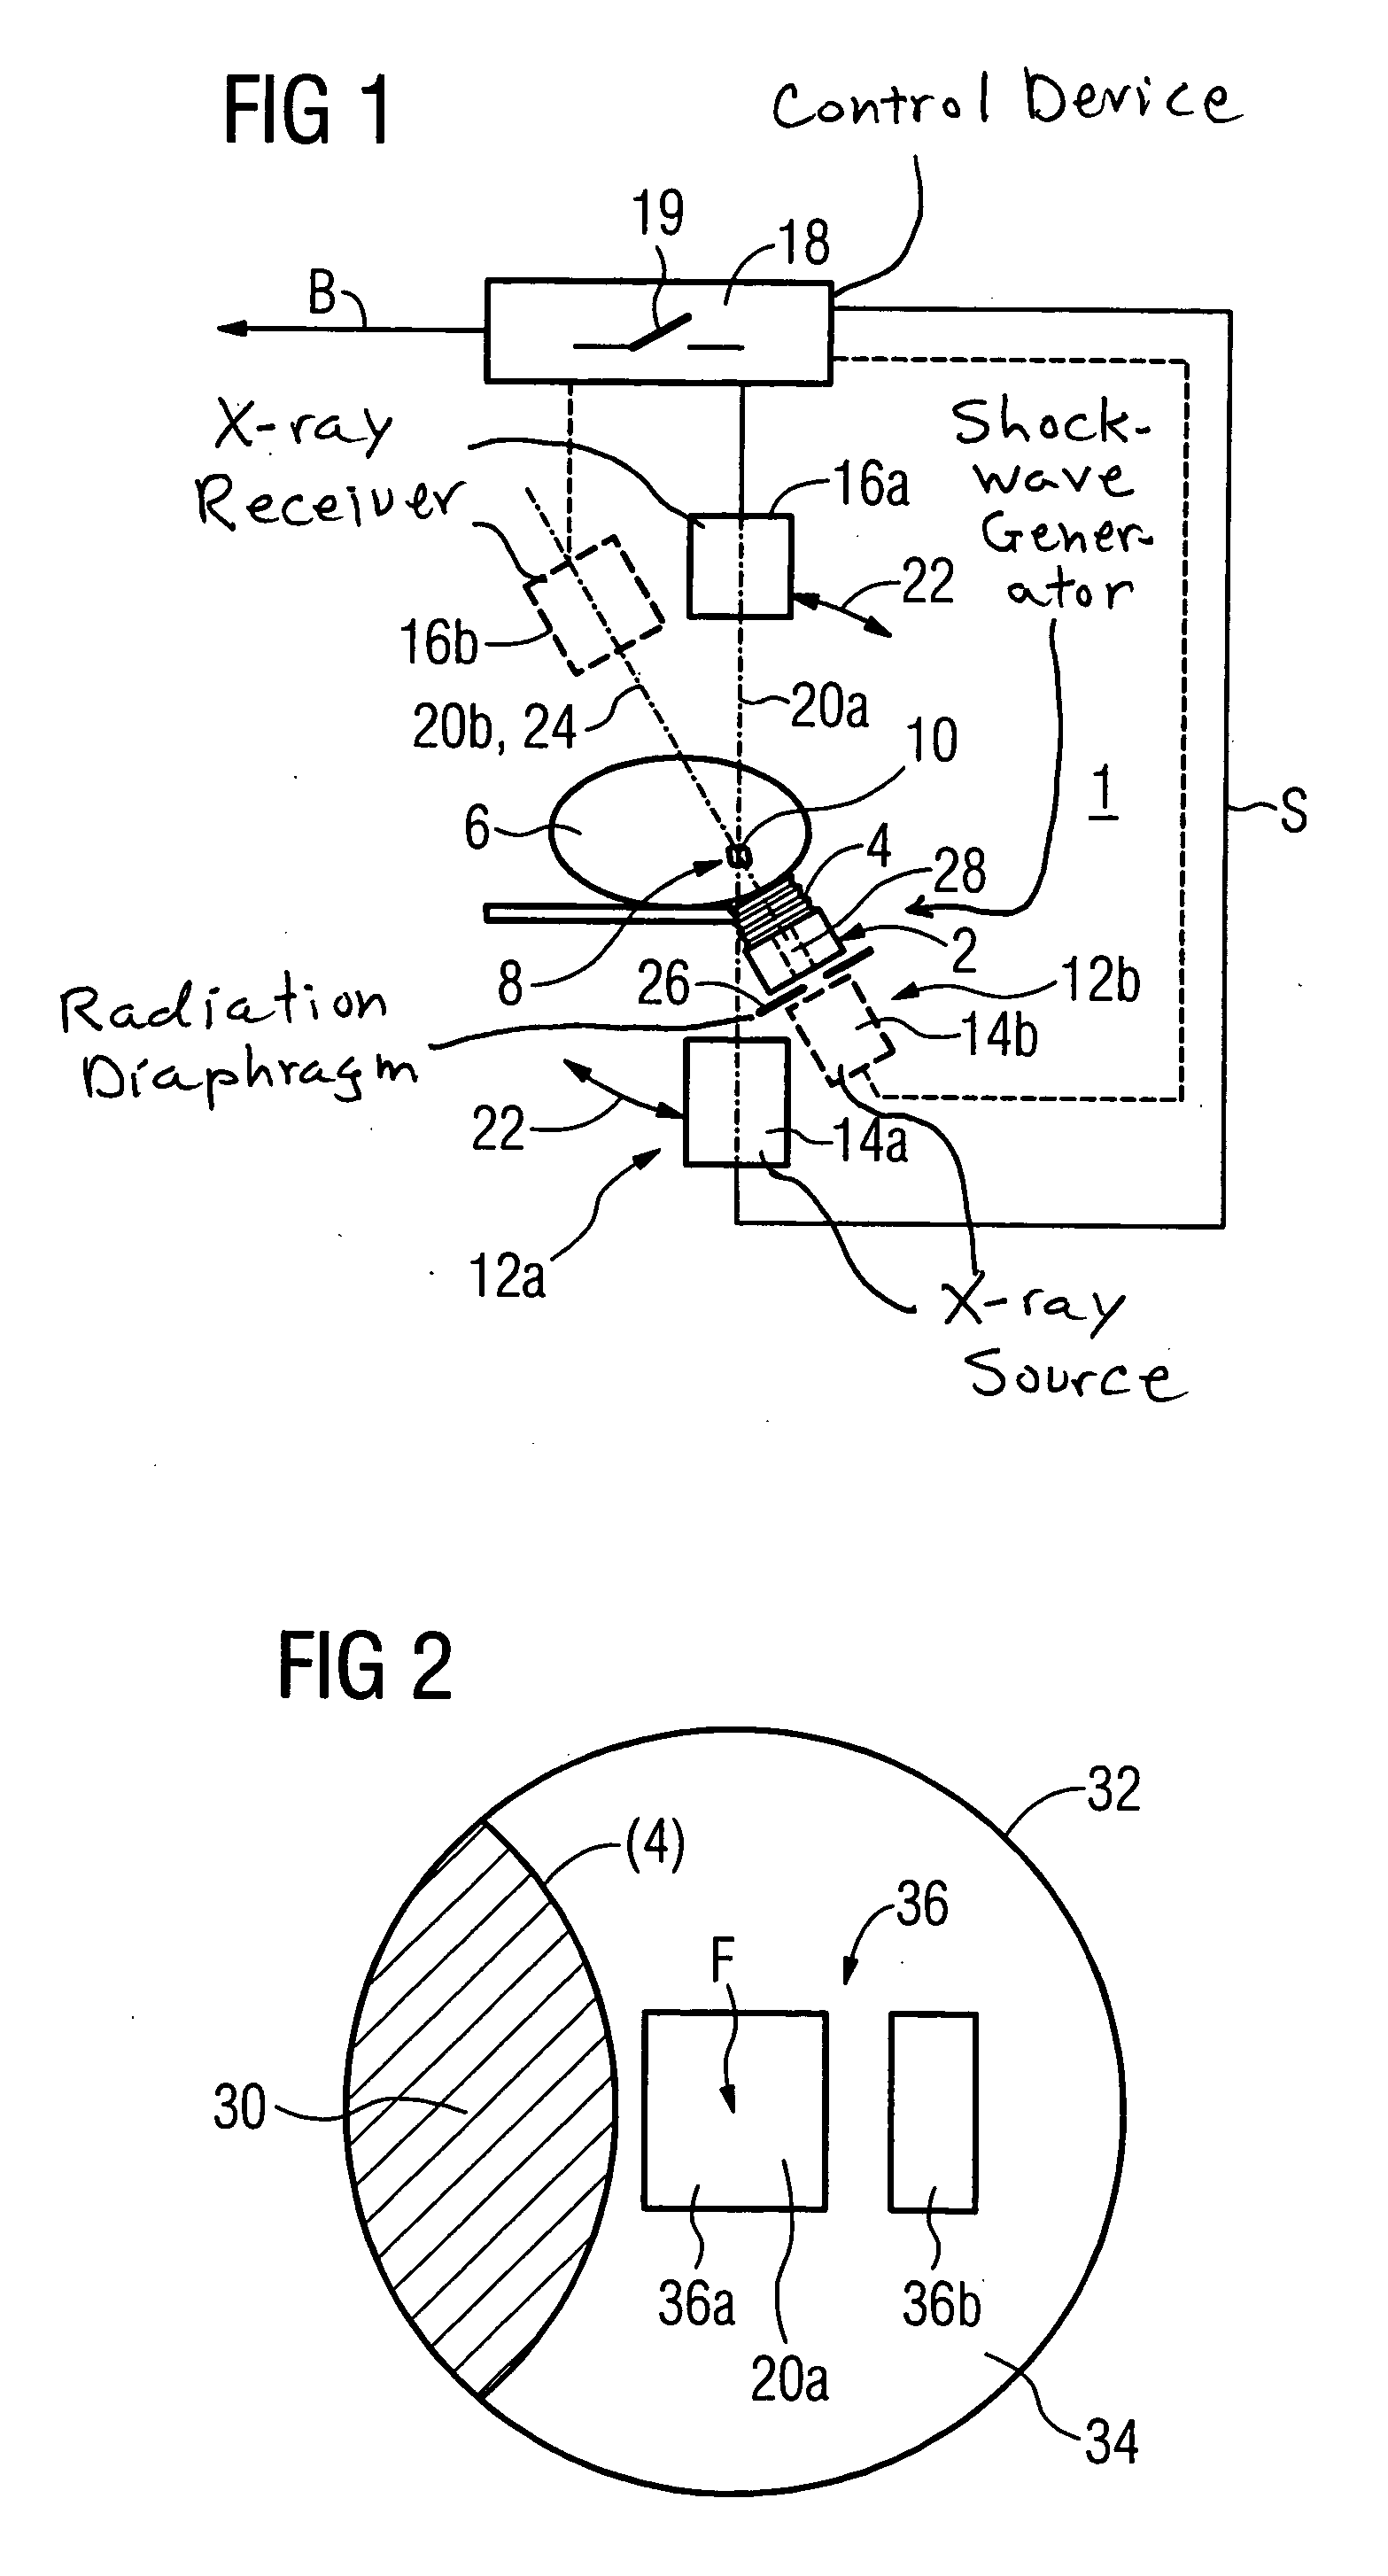 Method and apparatus for controlling the radiation dose in the generation of x-ray images for lithotripsy